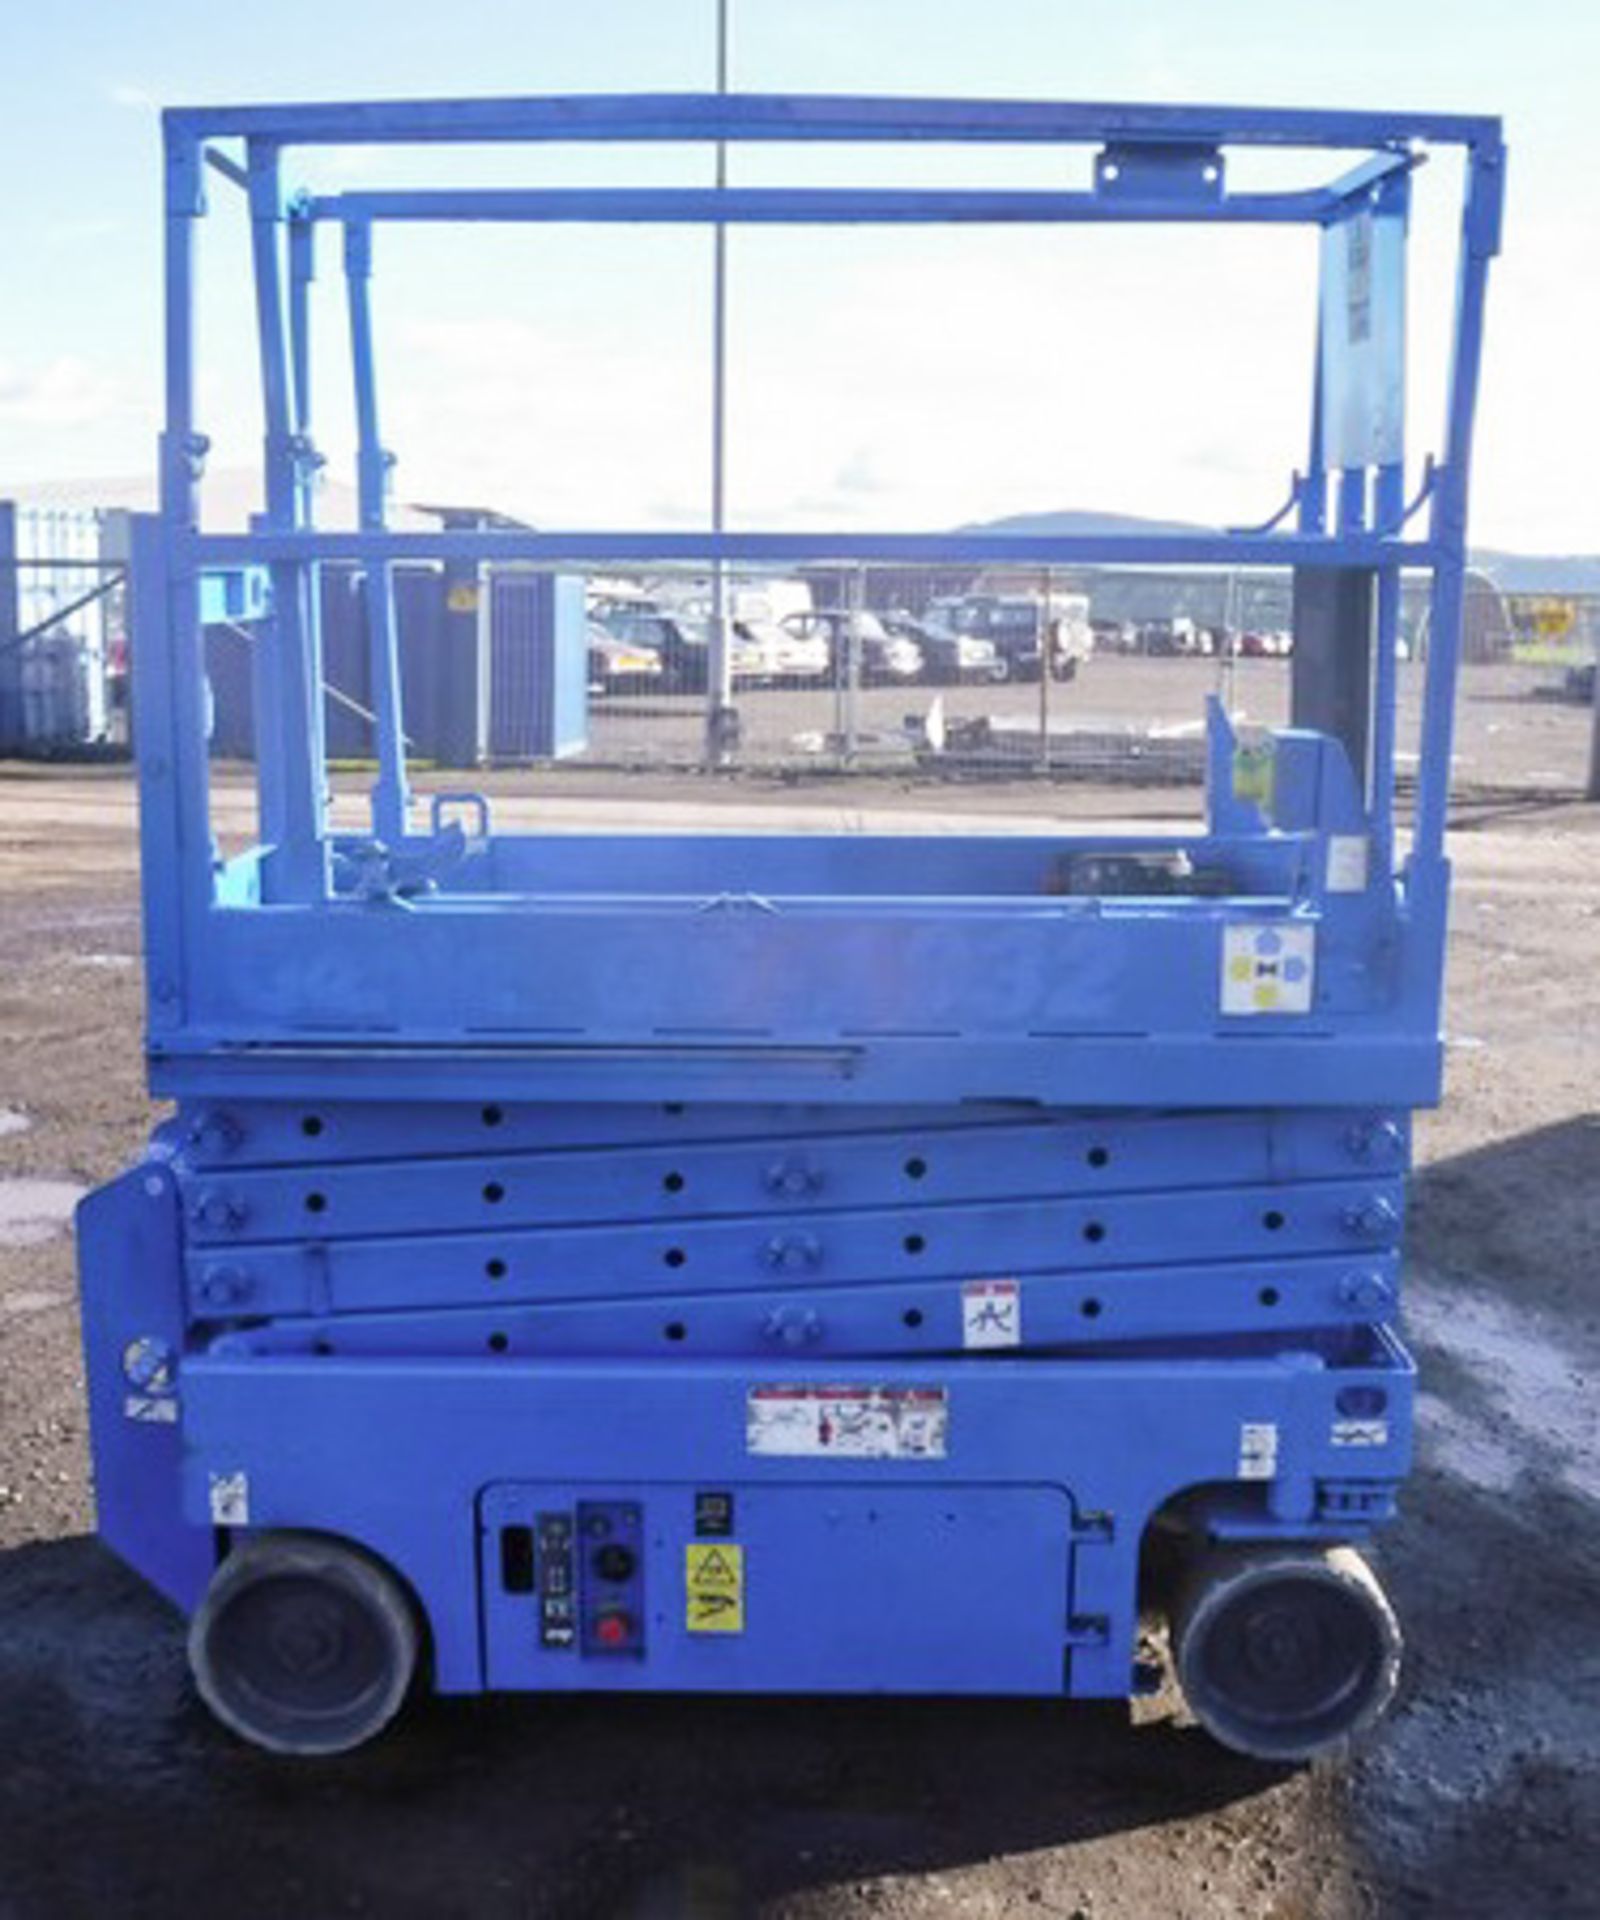 2005 GENIE GS1932, S/N GS3205-077931, 351HRS (NOT VERIFIED) - Image 2 of 7